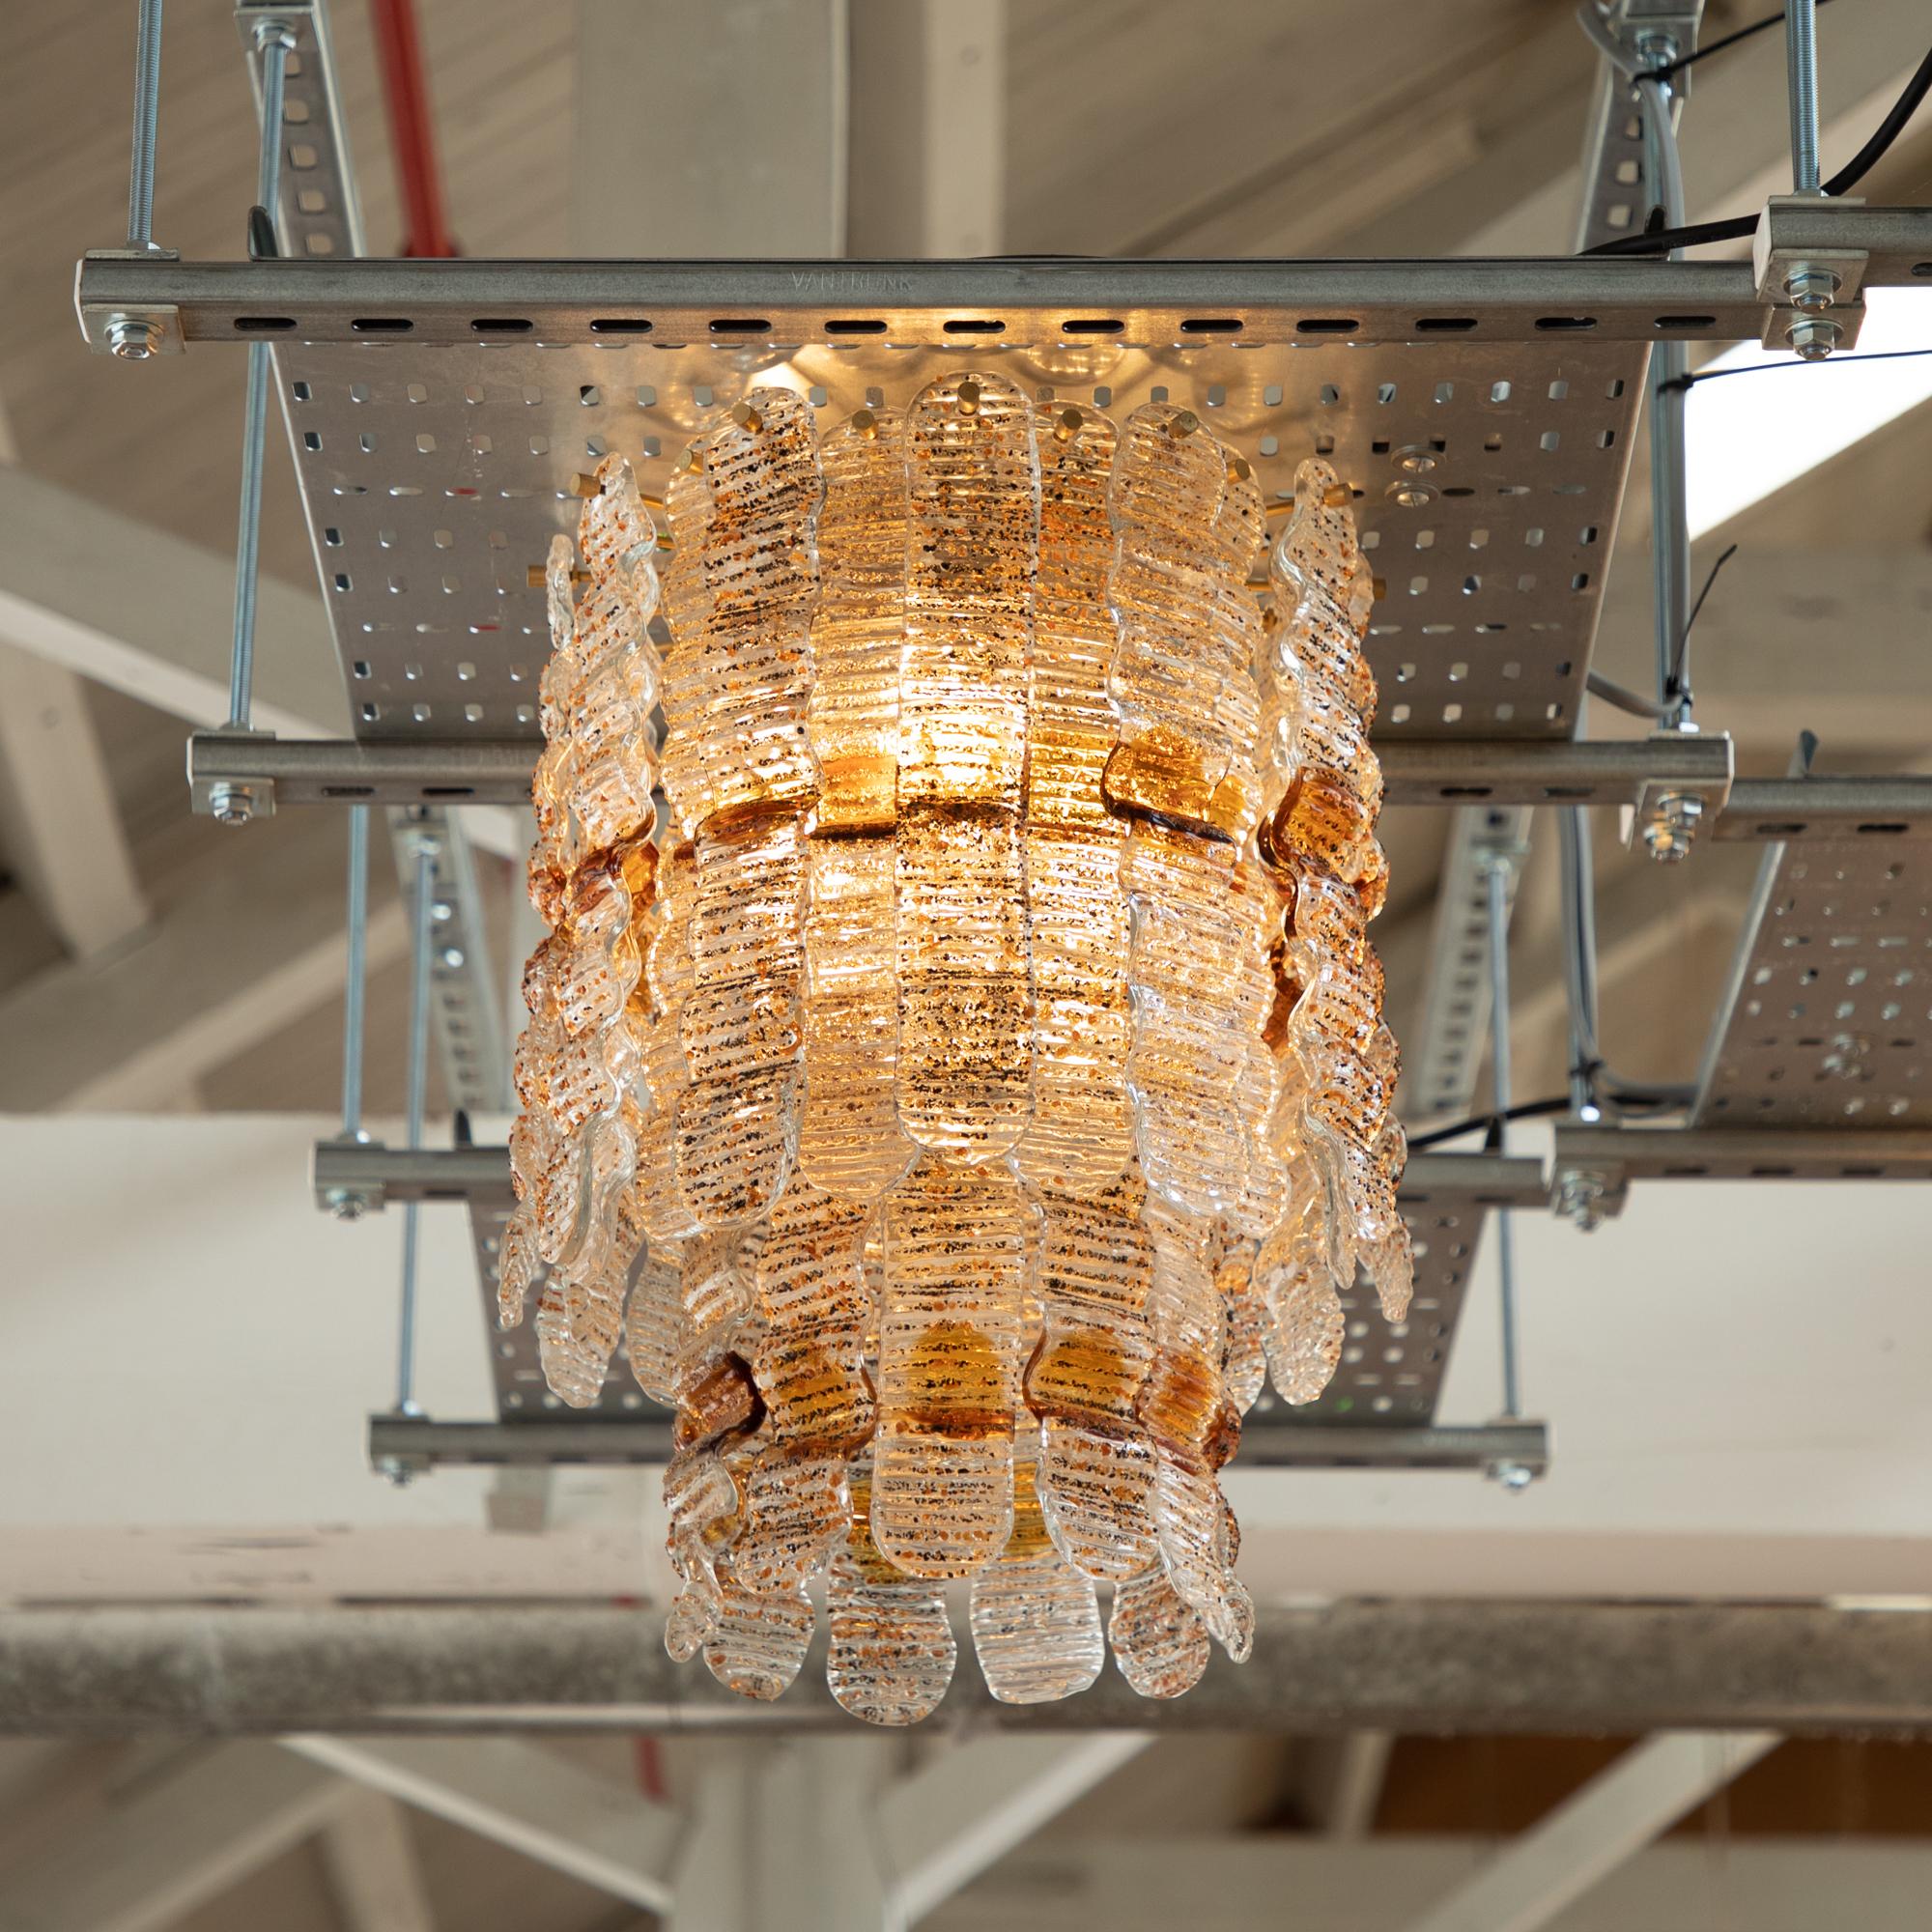 Stunning two-tier chandelier. 10 small and 24 large Murano glass plates. The soft curvaceous plates have an opaque textured finish with amber glass details where the plates dip and undulate. The overall effect once hung is a soft and mesmerising